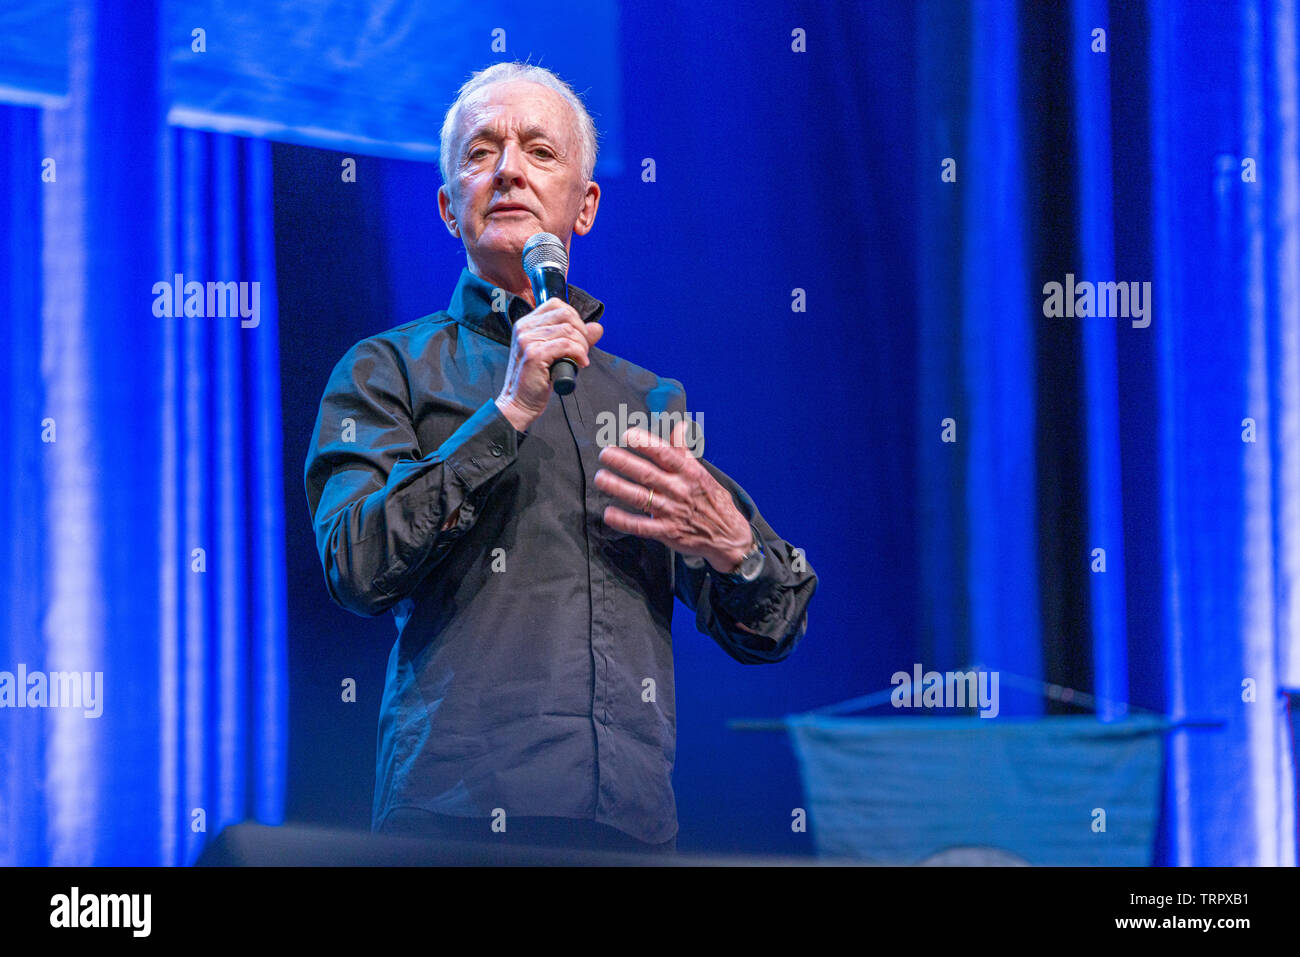 Bonn, Germany - June 8 2019: Anthony Daniels (*1946, English actor - C-3PO in Star Wars) talks about his experiences in Star Wars at FedCon 28 Stock Photo